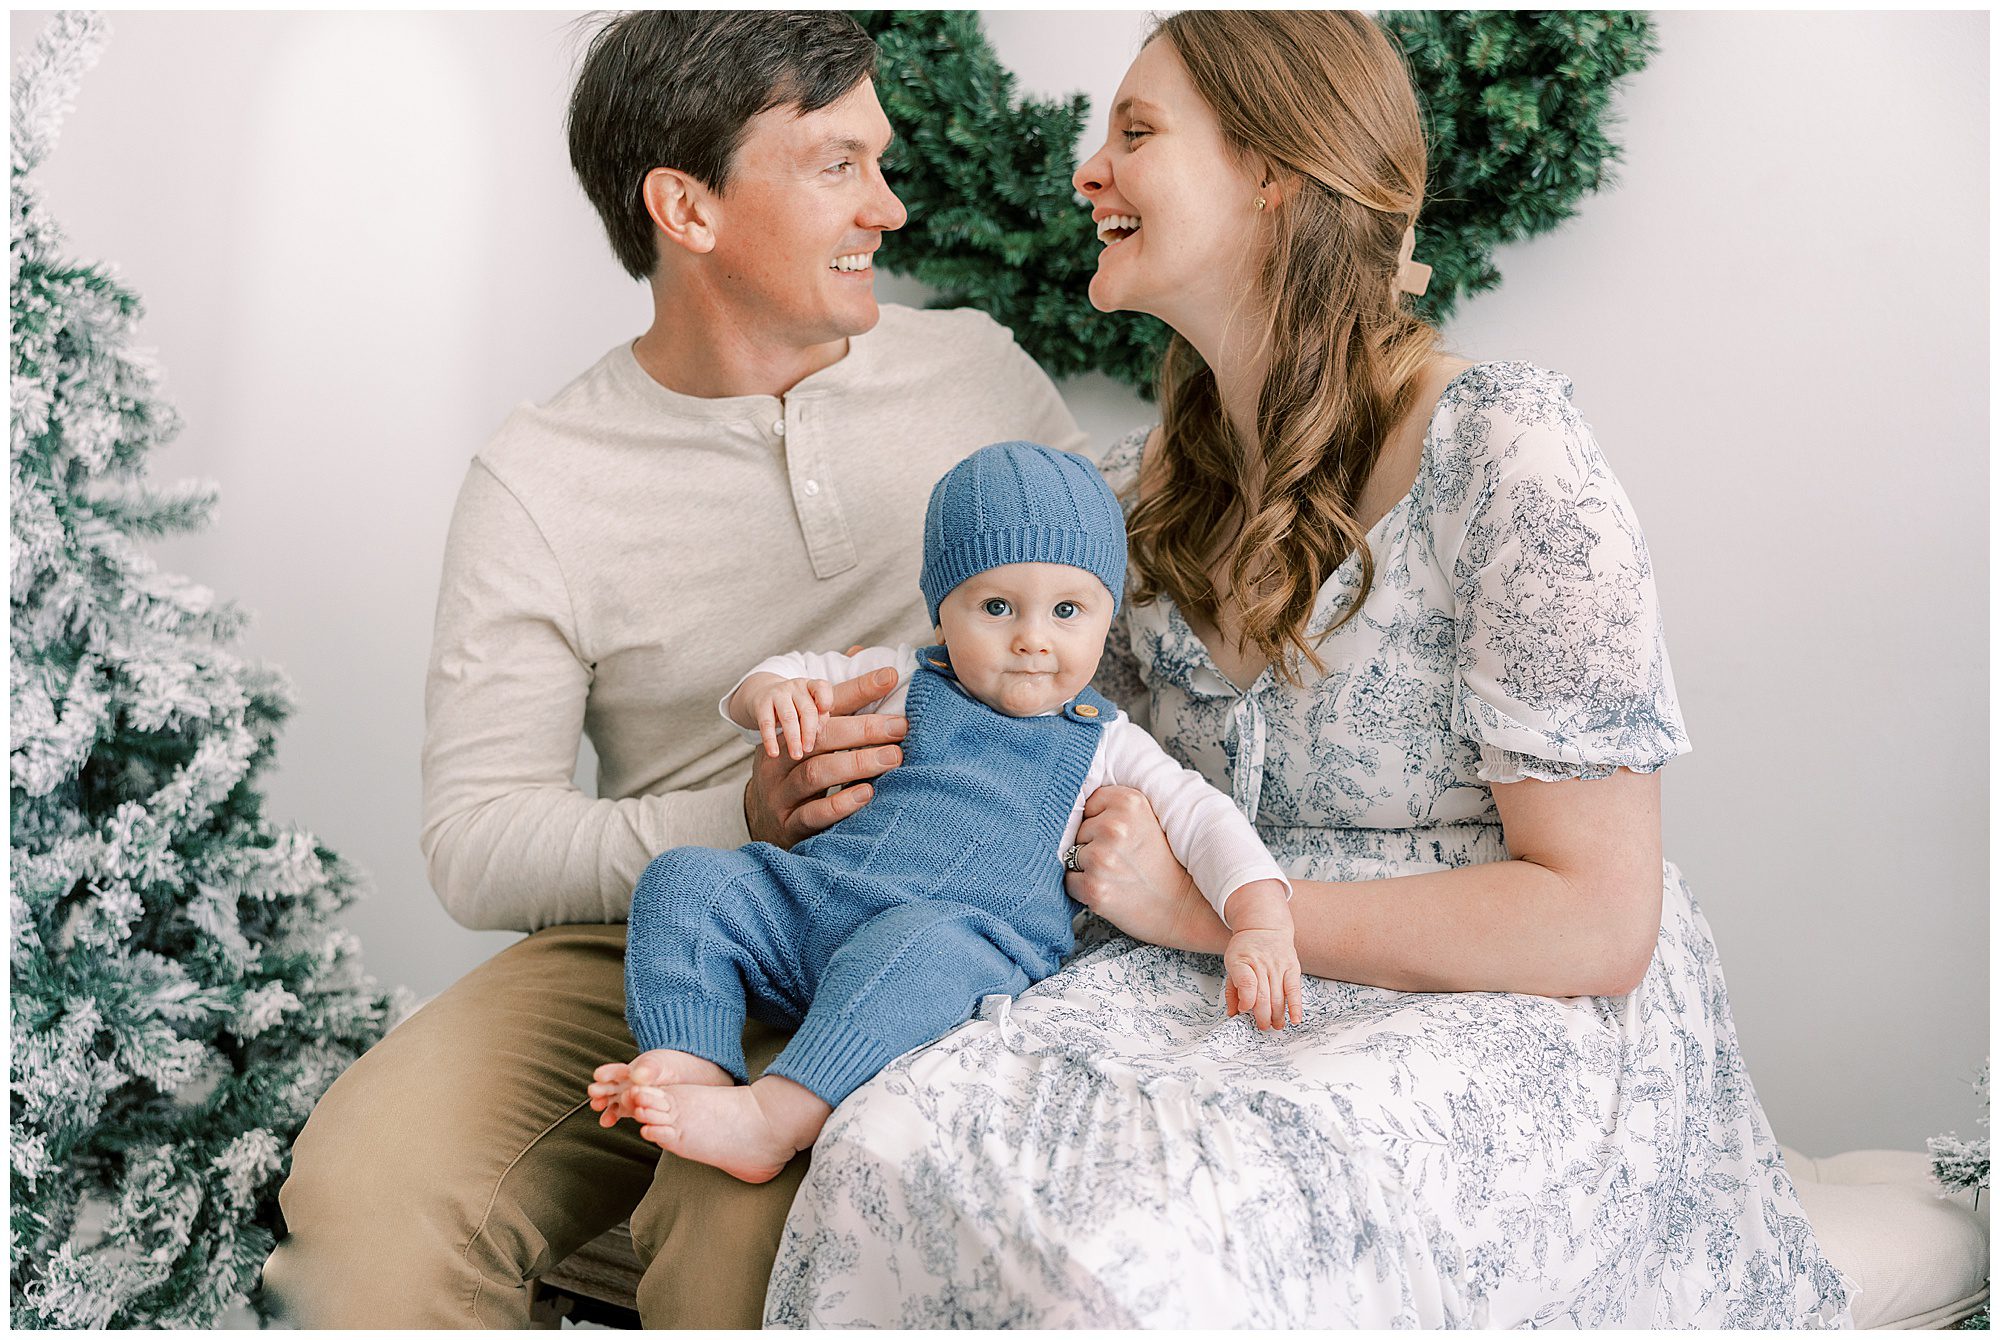 christmas photos with mom, dad and baby in a blue bonnet